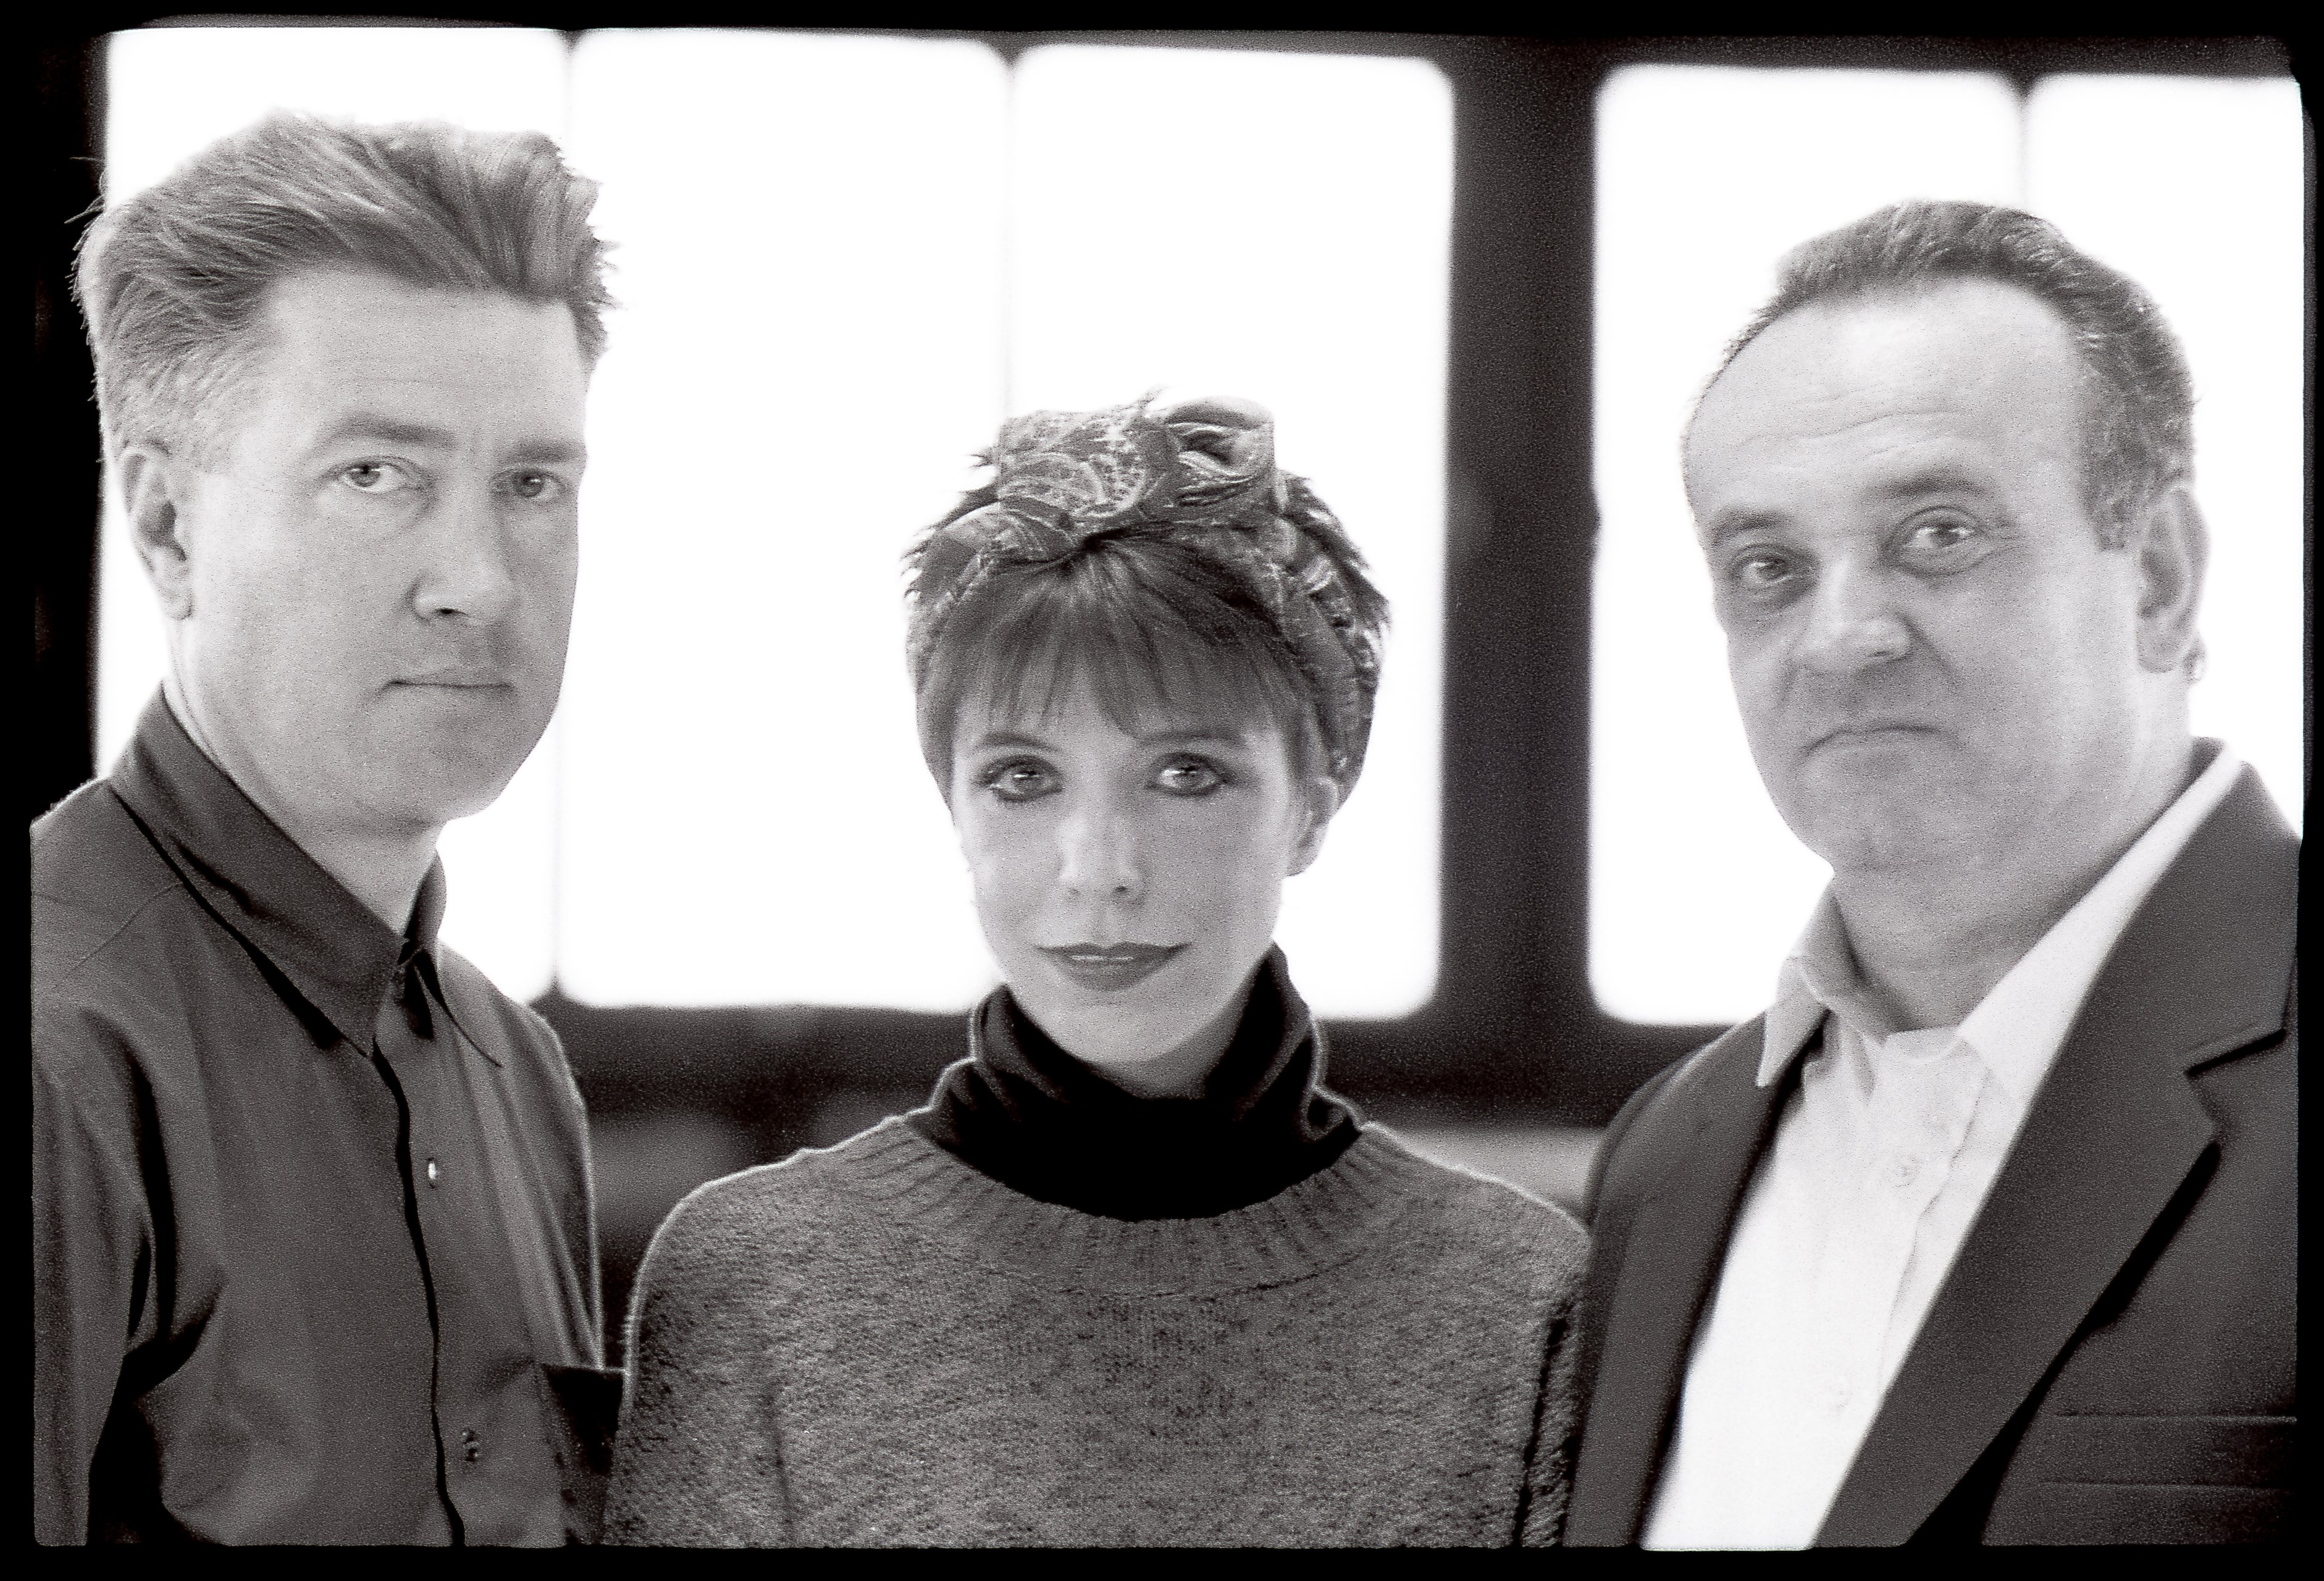 David Lynch, Julee Cruise, and Angelo Badalamenti in New York on October 25, 1989 | Source: Getty Images